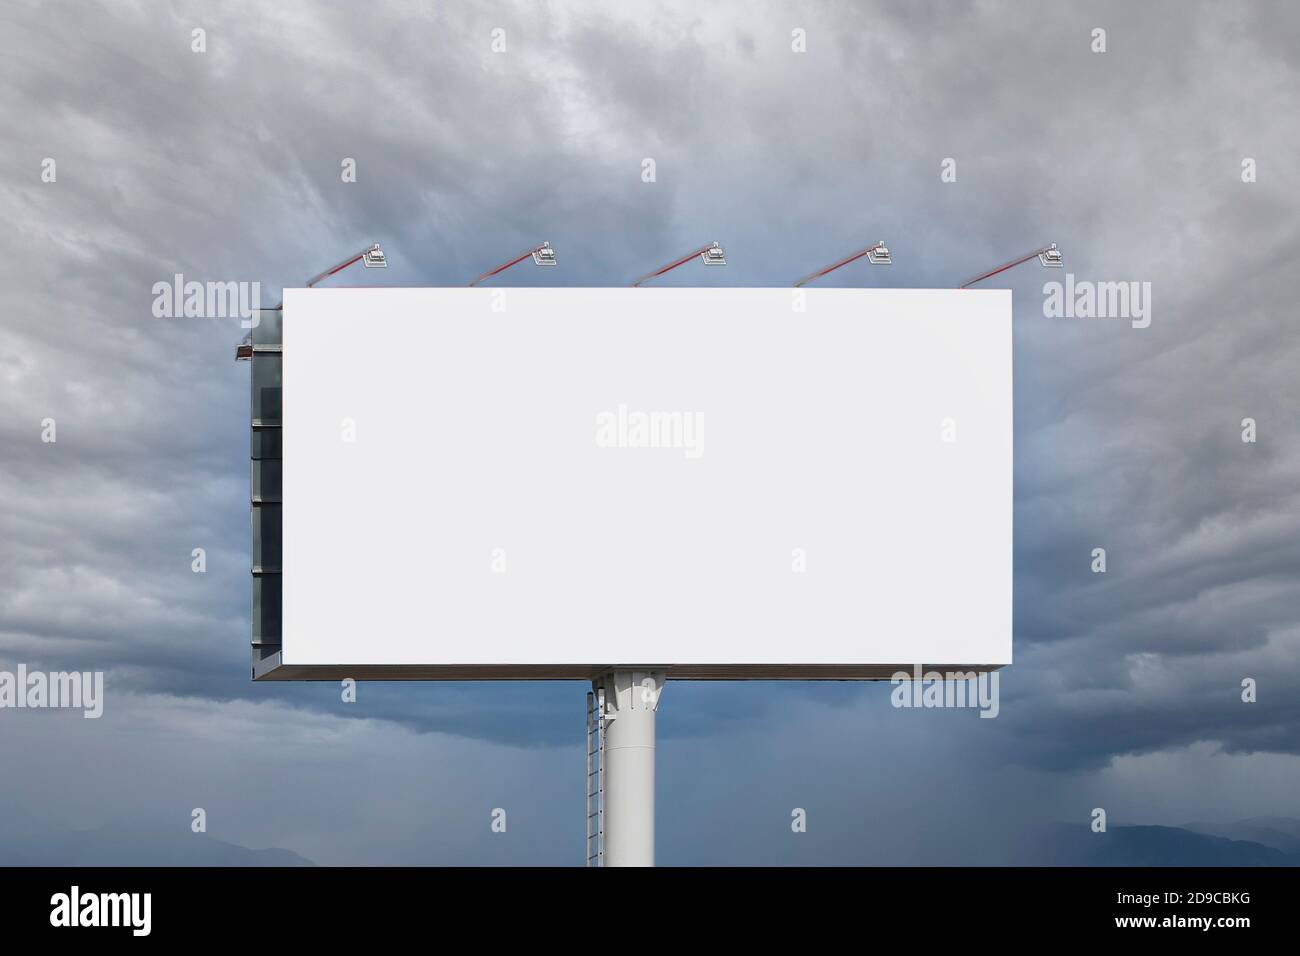 Blank billboard for advertising, against clouds Stock Photo